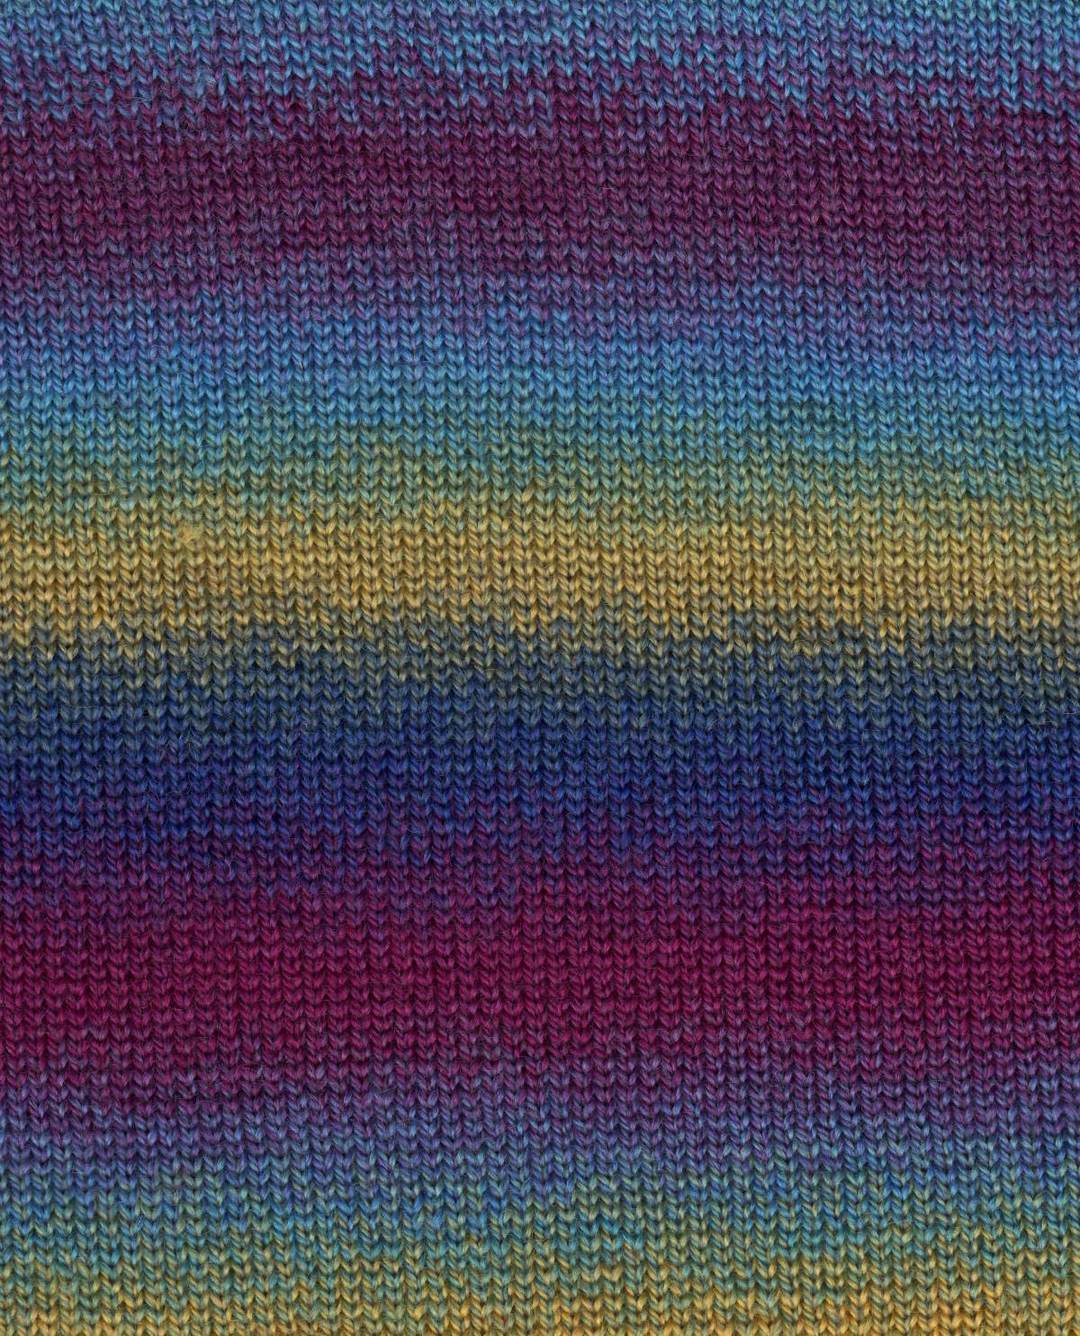 Queensland Collection Perth yarn color 118